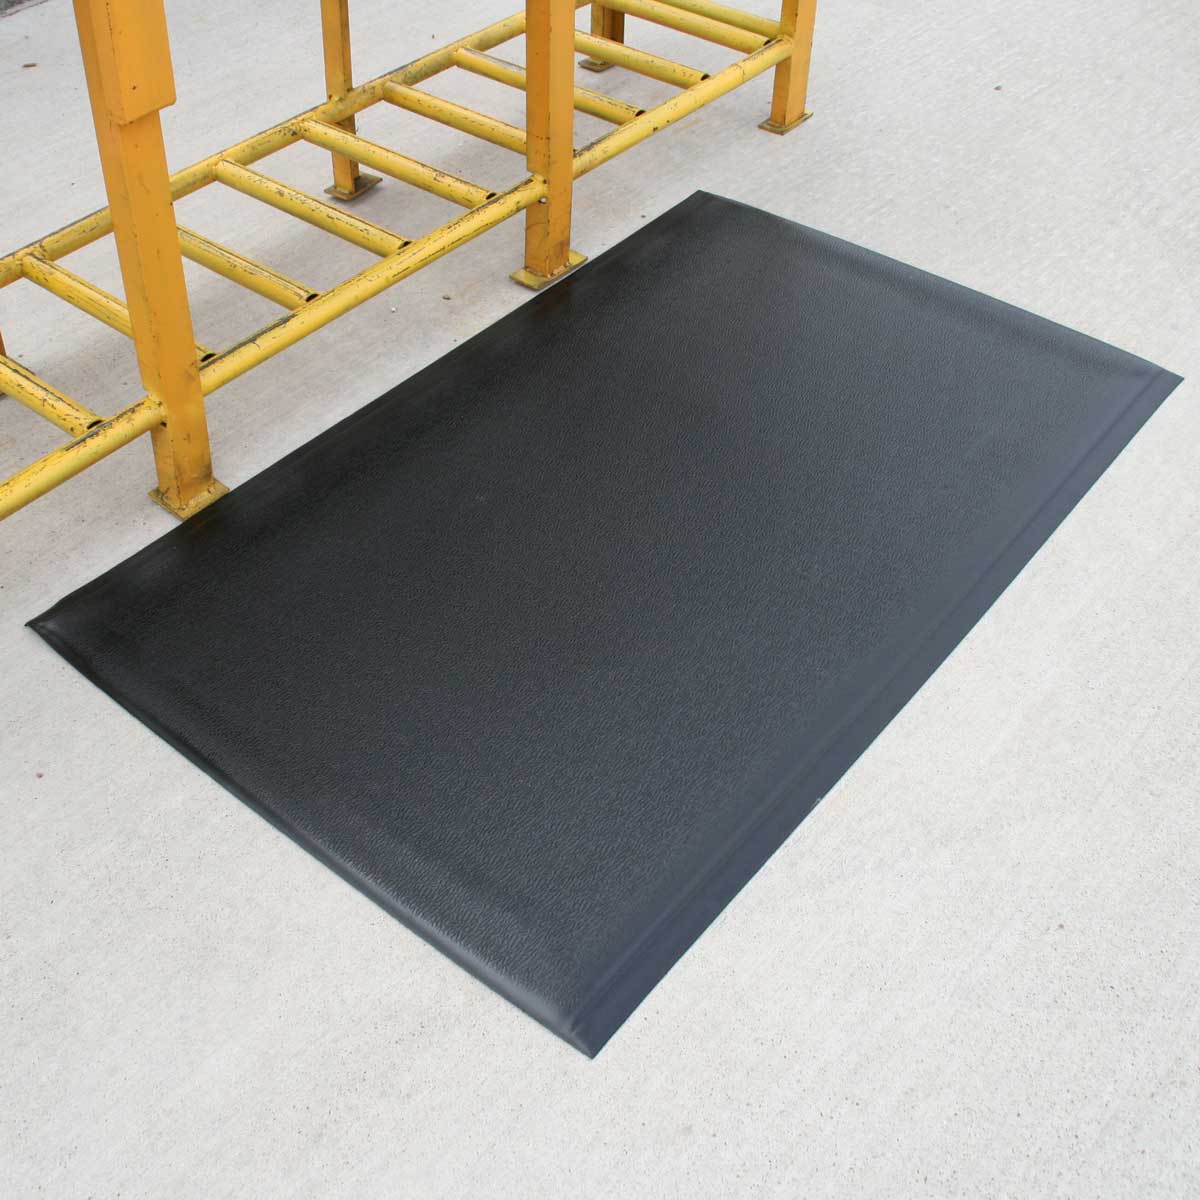 Dura Step Anti Fatigue Mat by Commercial Mats and Rubber.com